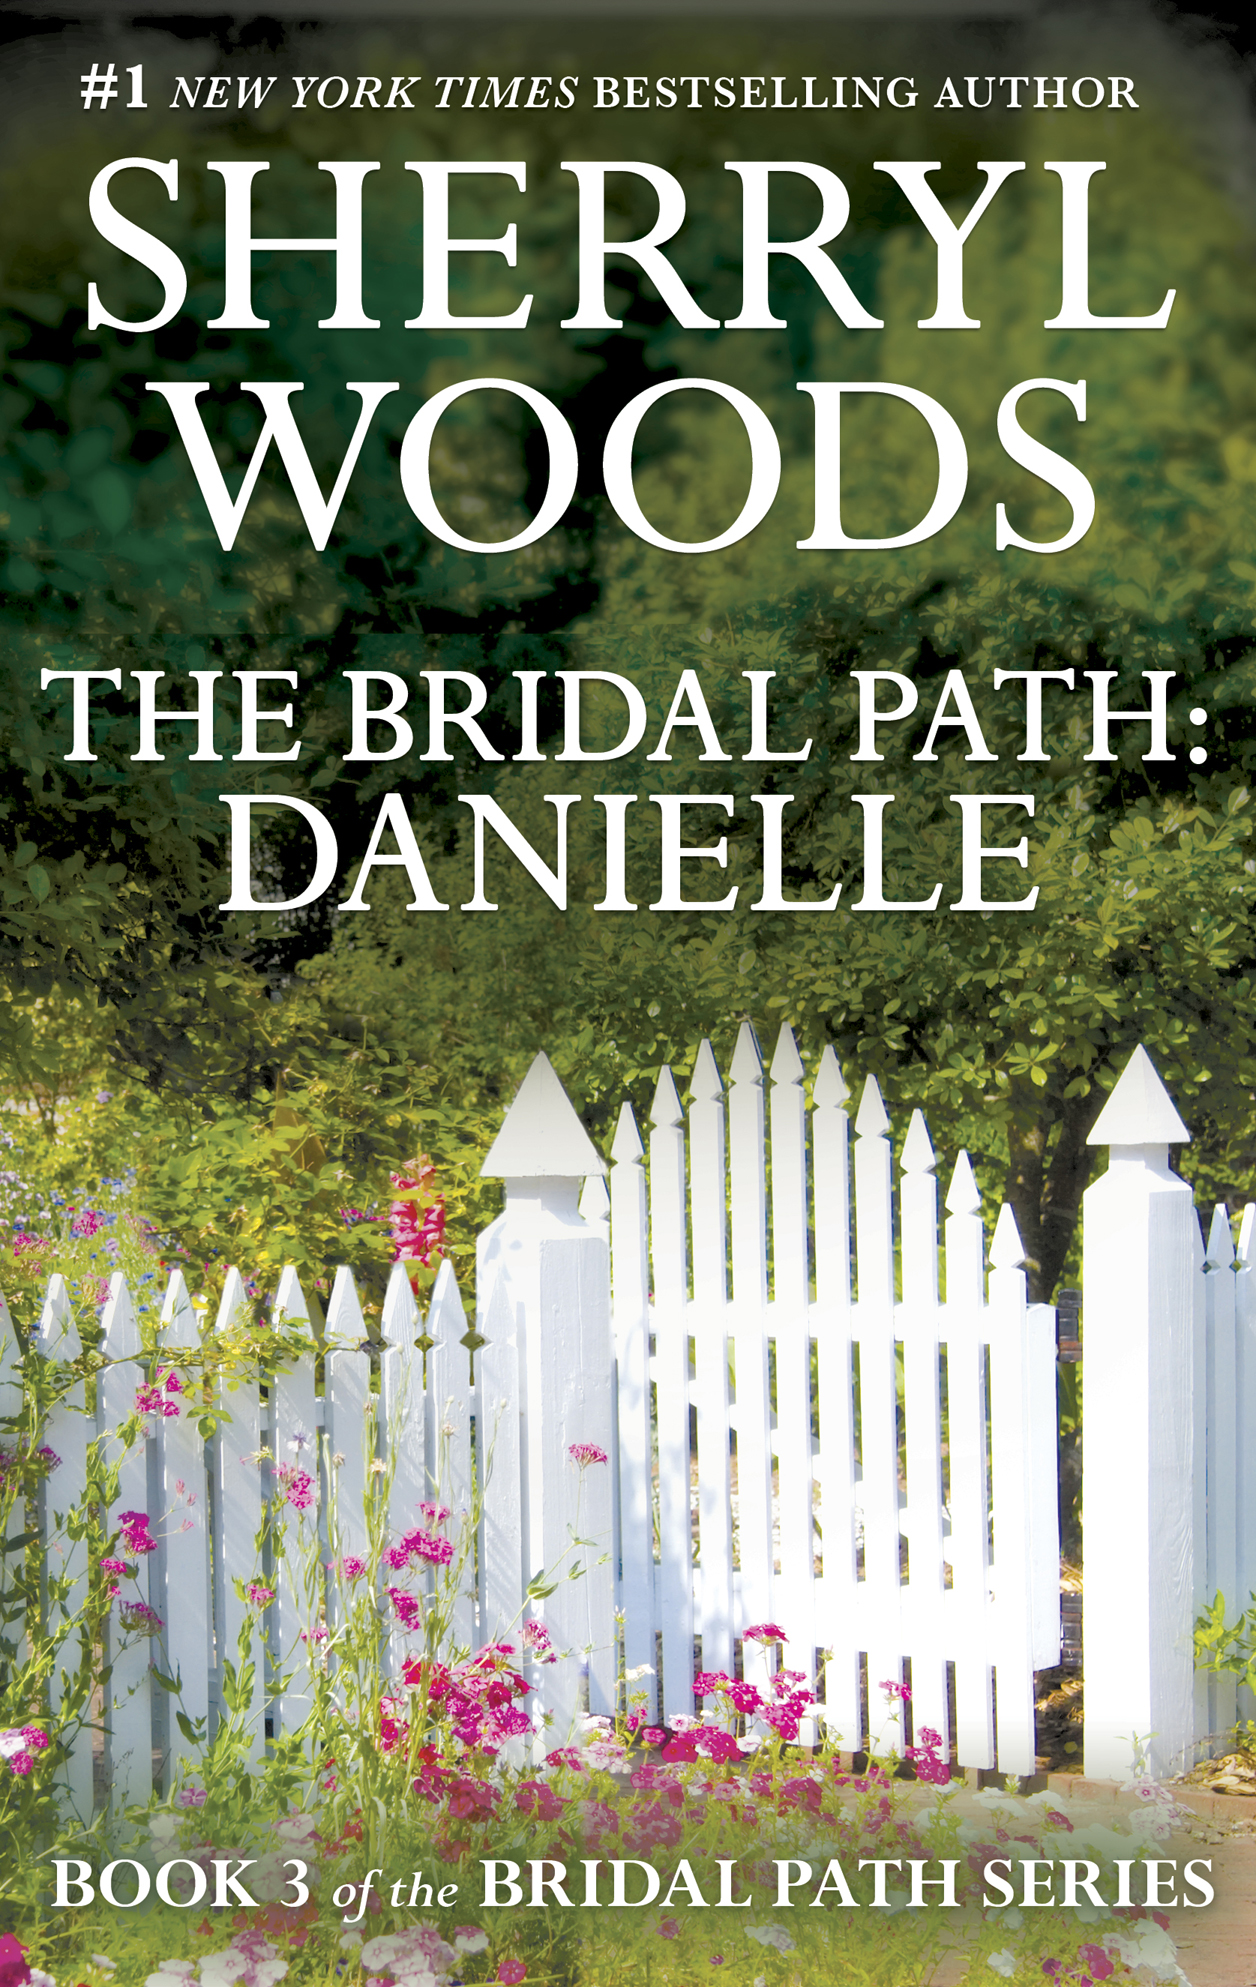 The Bridal Path: Danielle (1995) by Sherryl Woods